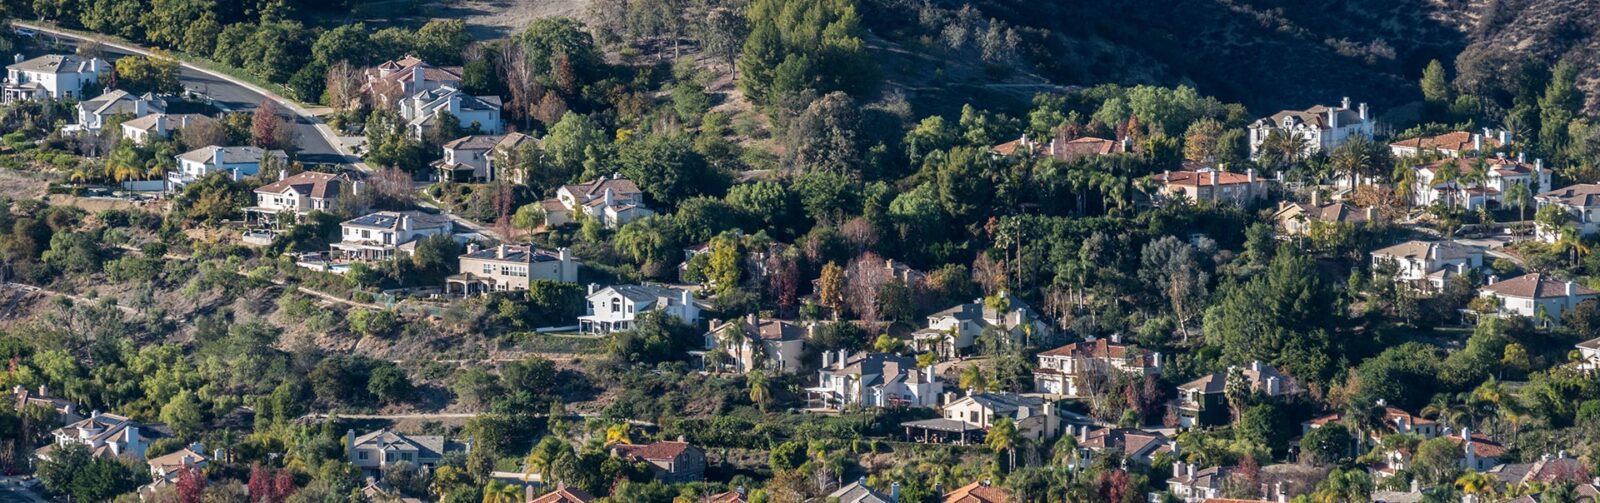 A high view of upscale hillside homes in Calabasas, CA 